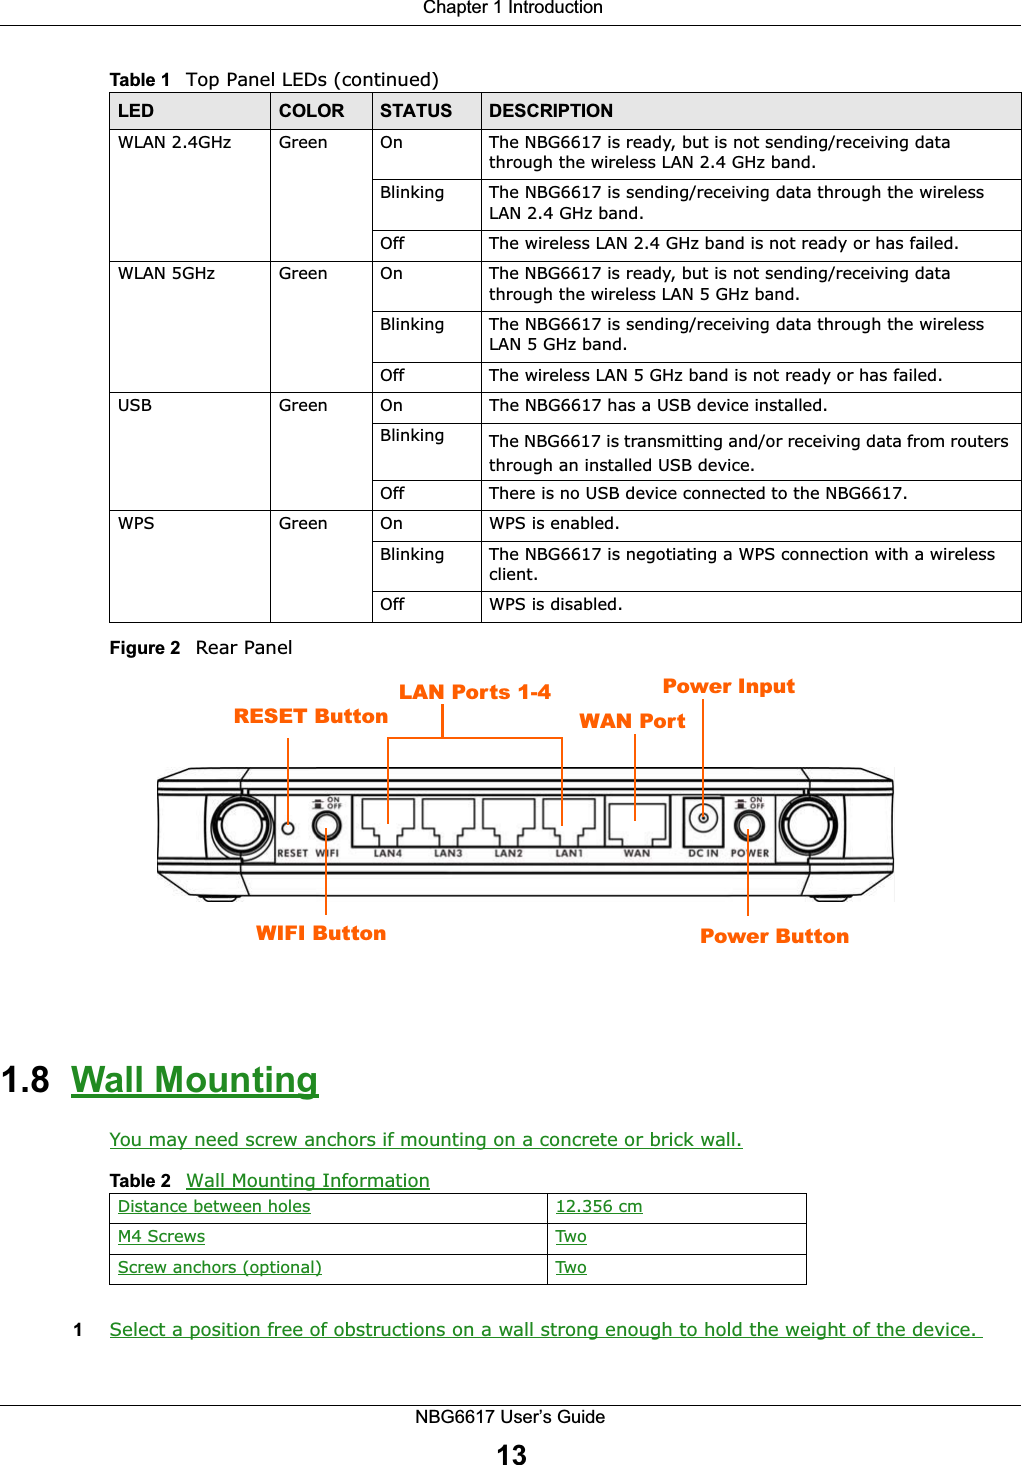  Chapter 1 IntroductionNBG6617 User’s Guide13Figure 2   Rear Panel1.8  Wall MountingYou may need screw anchors if mounting on a concrete or brick wall.1Select a position free of obstructions on a wall strong enough to hold the weight of the device. WLAN 2.4GHz Green On The NBG6617 is ready, but is not sending/receiving data through the wireless LAN 2.4 GHz band. Blinking The NBG6617 is sending/receiving data through the wireless LAN 2.4 GHz band.Off The wireless LAN 2.4 GHz band is not ready or has failed.WLAN 5GHz Green On The NBG6617 is ready, but is not sending/receiving data through the wireless LAN 5 GHz band. Blinking The NBG6617 is sending/receiving data through the wireless LAN 5 GHz band.Off The wireless LAN 5 GHz band is not ready or has failed.USB Green On The NBG6617 has a USB device installed.Blinking The NBG6617 is transmitting and/or receiving data from routers through an installed USB device.Off There is no USB device connected to the NBG6617.WPS Green On WPS is enabled.Blinking The NBG6617 is negotiating a WPS connection with a wireless client.Off WPS is disabled.Table 1   Top Panel LEDs (continued)LED COLOR STATUS DESCRIPTIONLAN Ports 1-4WAN PortRESET ButtonWIFI Button Power ButtonPower InputTable 2   Wall Mounting InformationDistance between holes 12.356 cmM4 Screws TwoScrew anchors (optional) Two